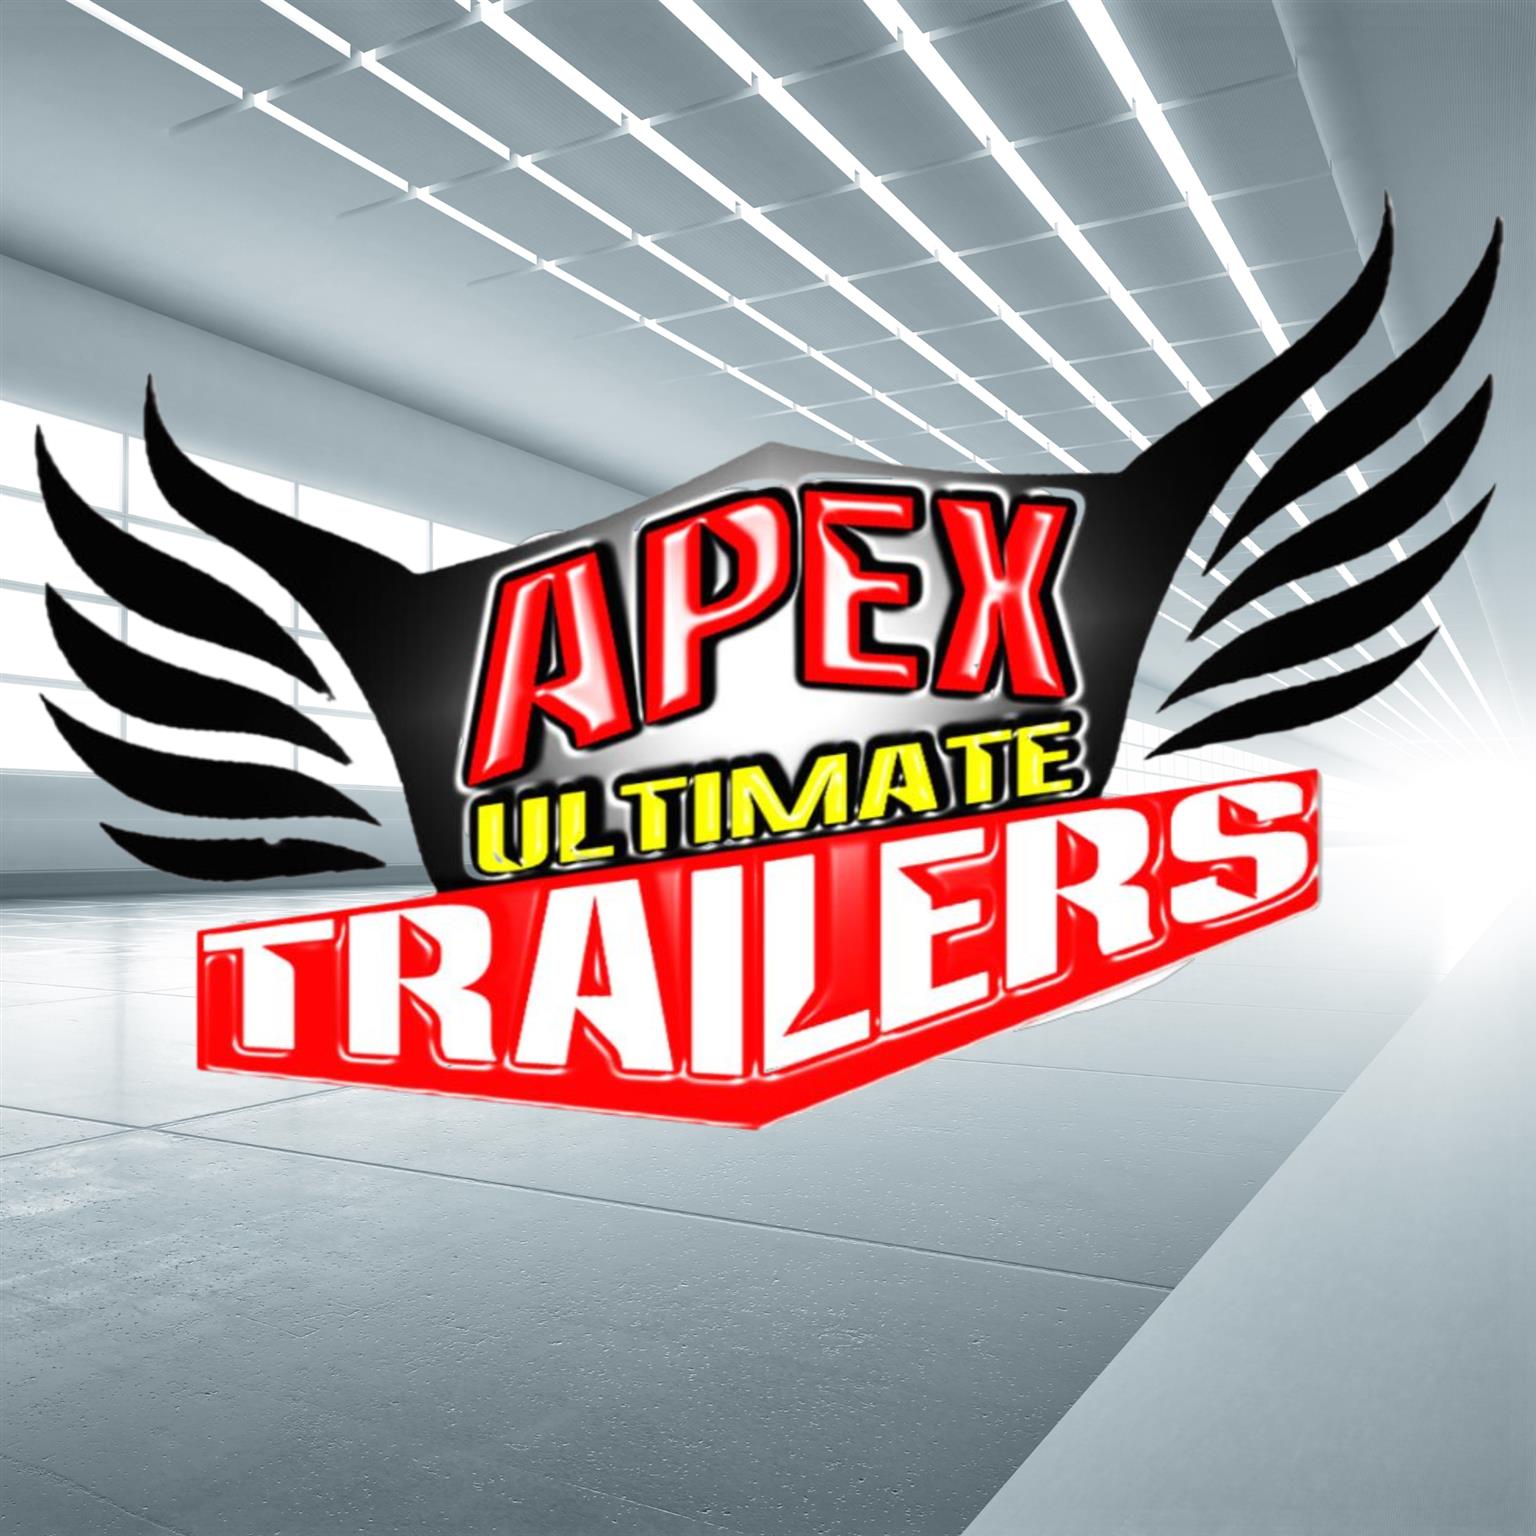 Find Apex Ultimate Trailers Pty Ltd's adverts listed on Junk Mail